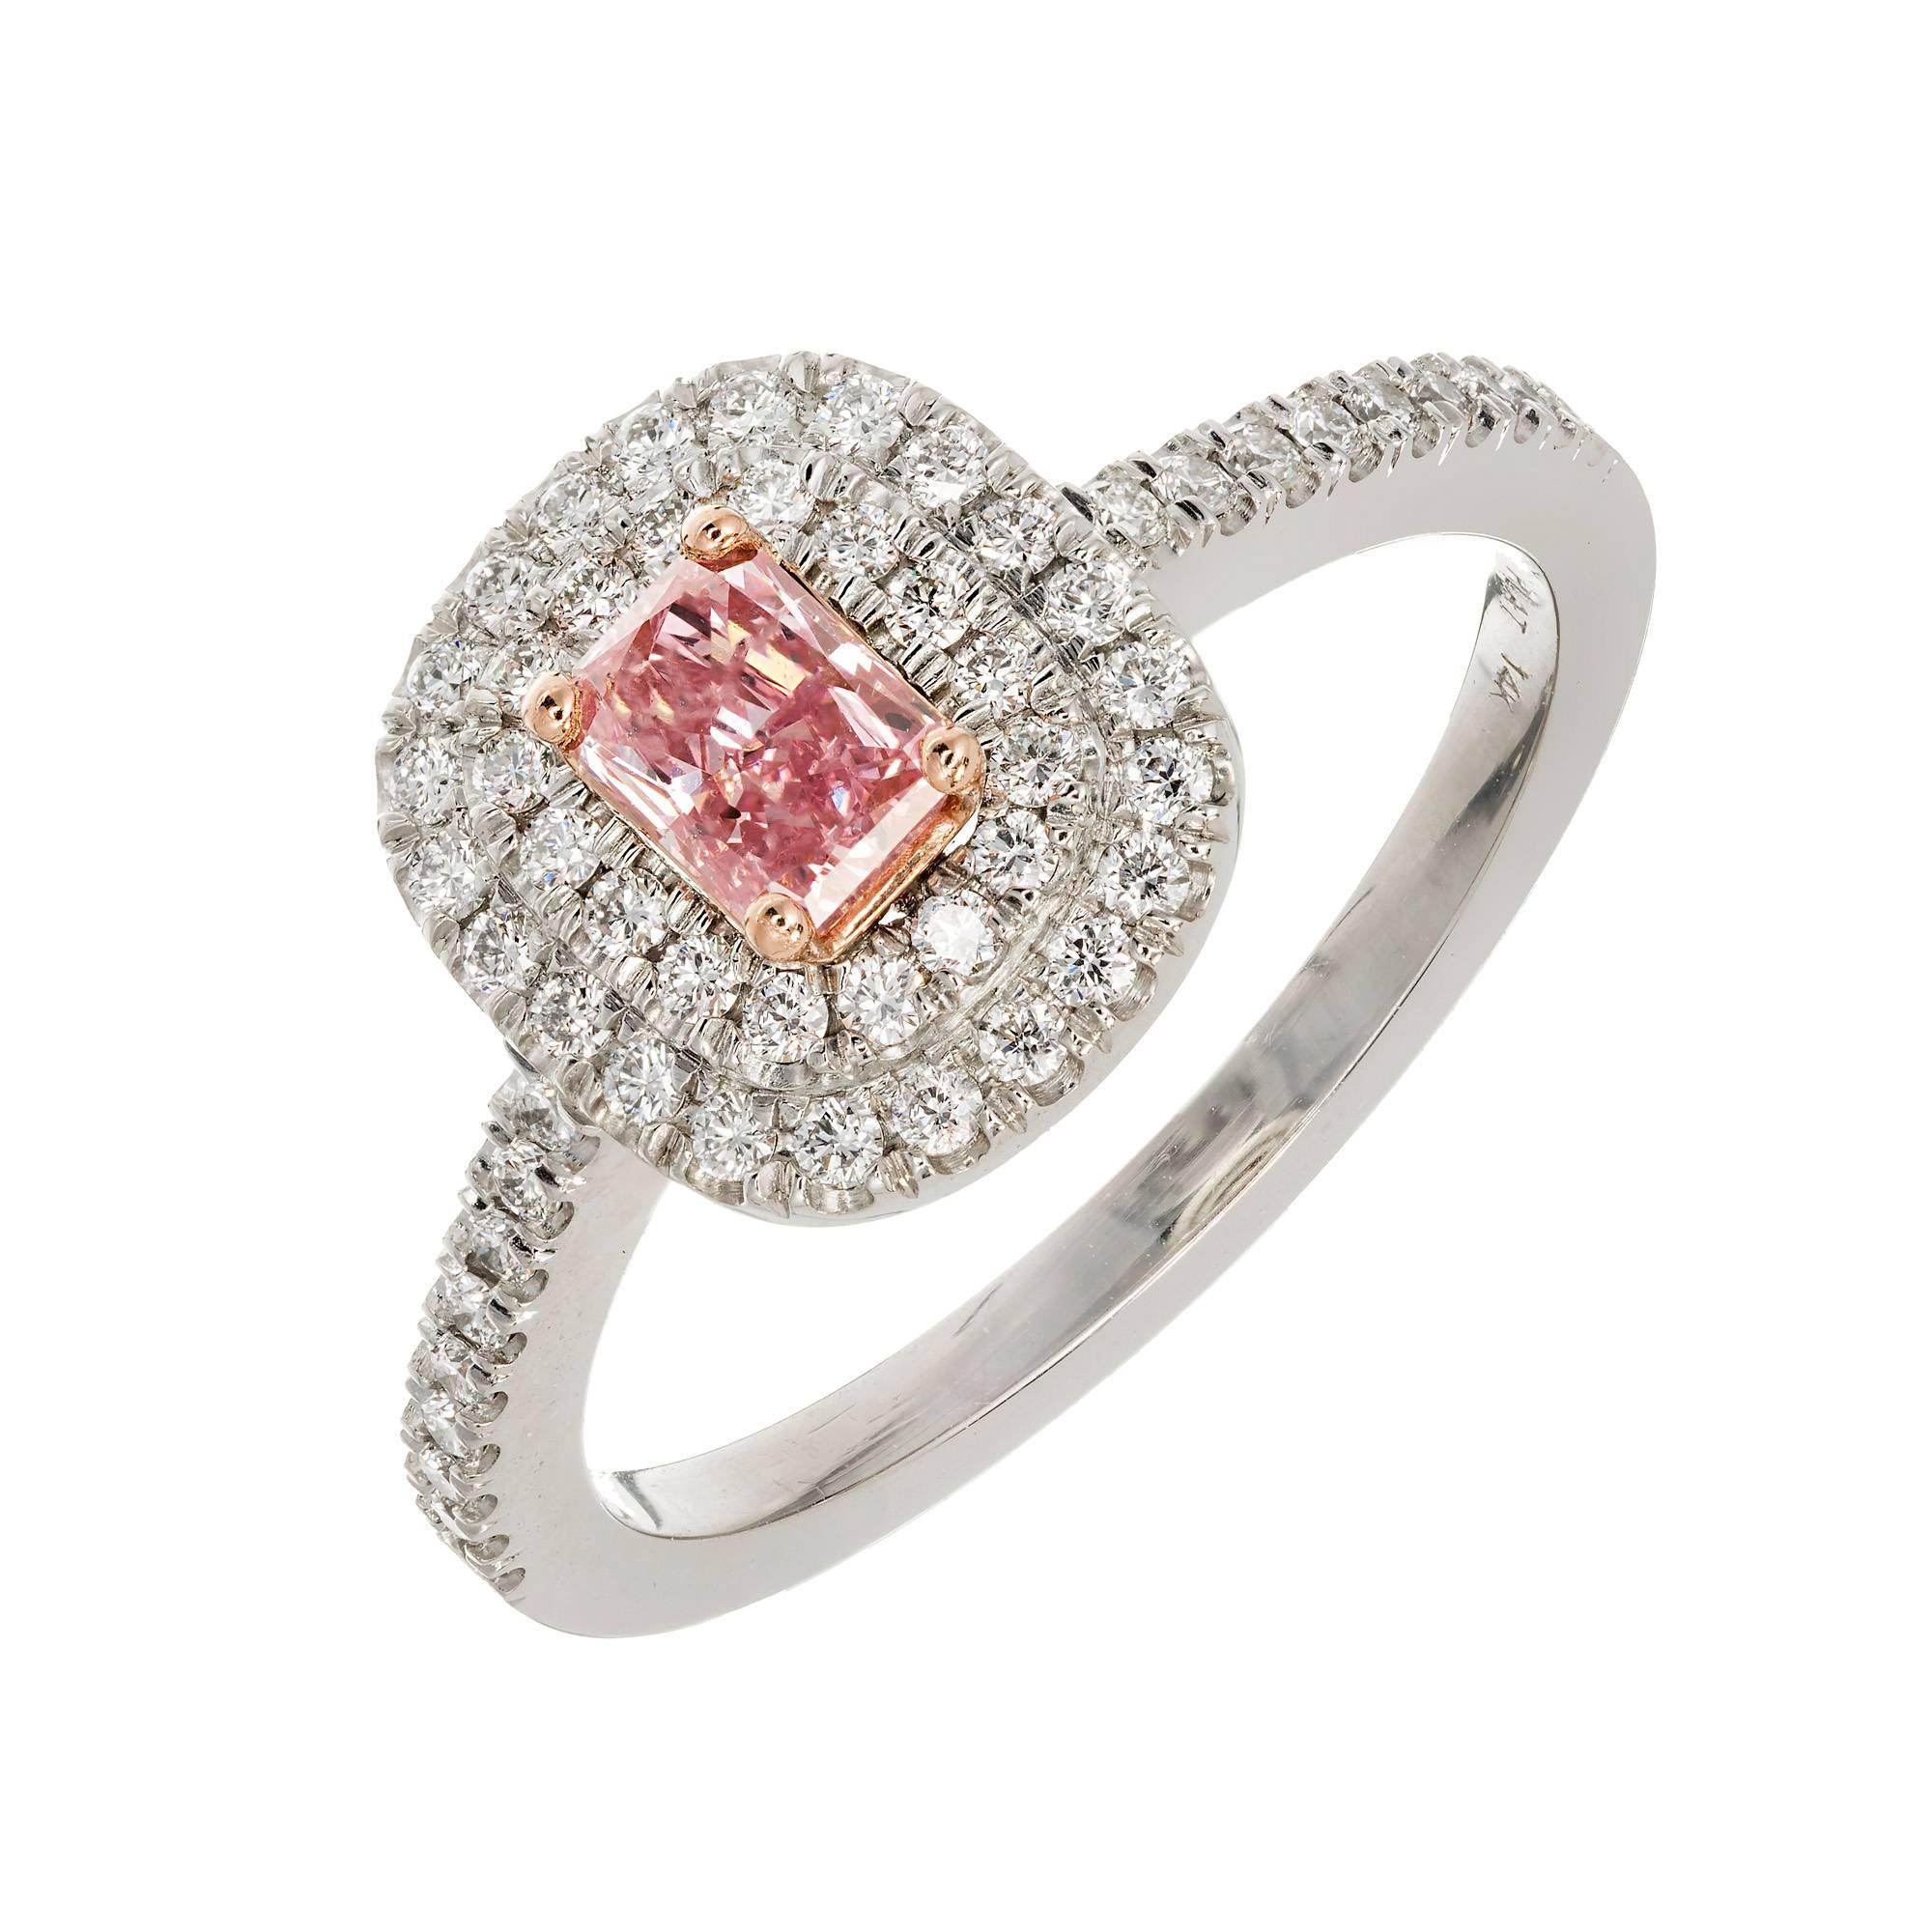 Peter Suchy bright fancy intense pink diamond halo engagement ring in a platinum setting with a 14k rose gold center. GIA certified 21654240587

1 fancy intense pink diamond.  Approximately .31 carats. GIA Certificate # 21654240587
59 full cut